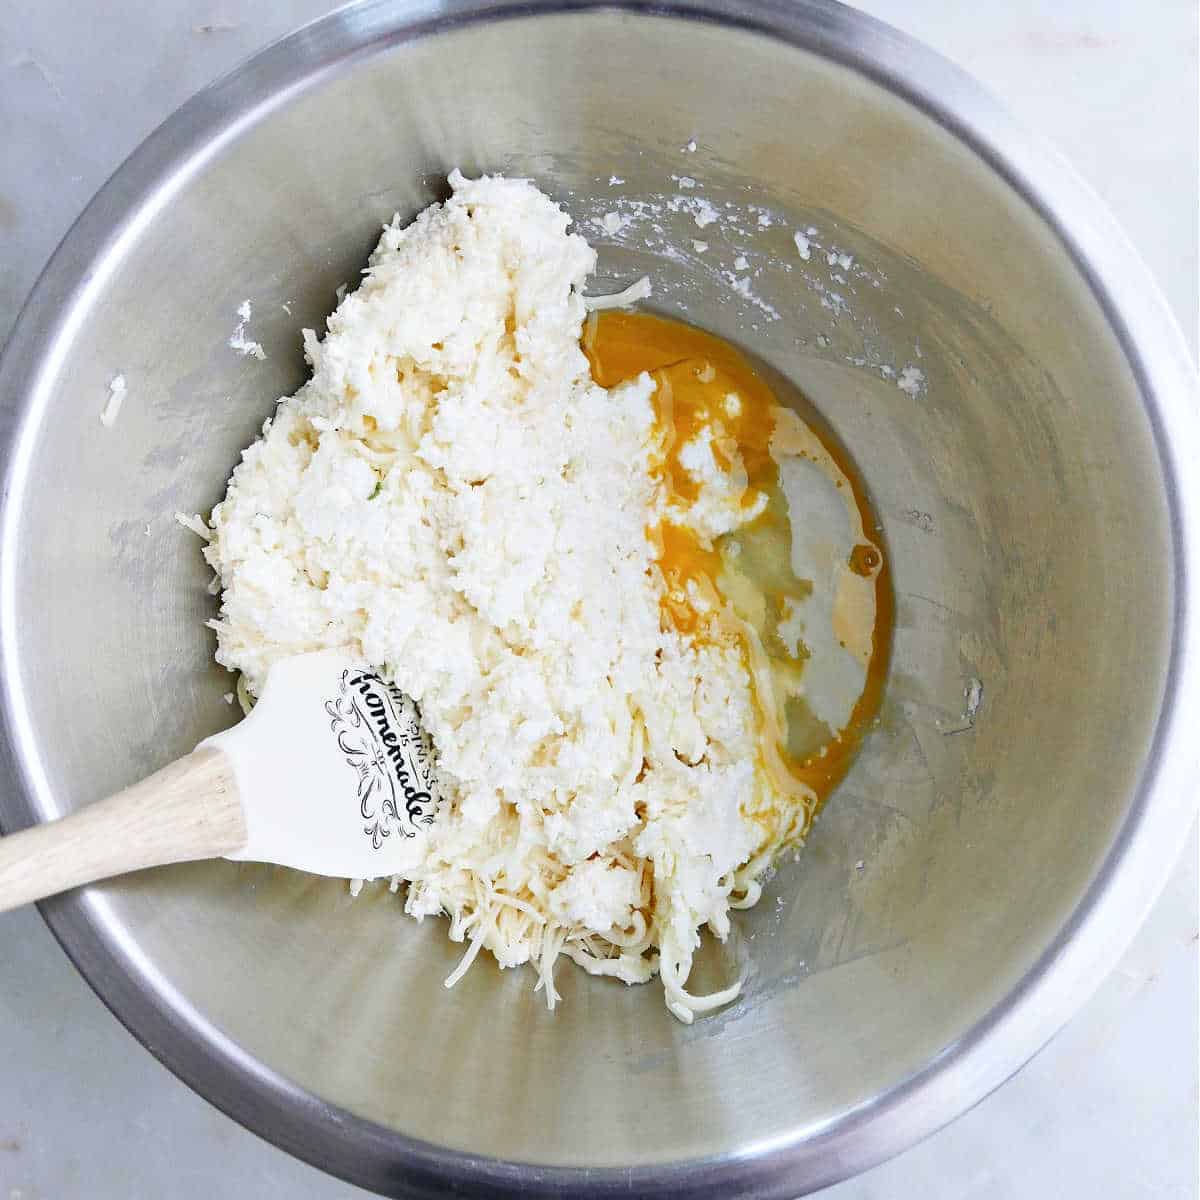 mozzarella, parmesan, and ricotta cheeses being mixed with a beaten egg in a bowl